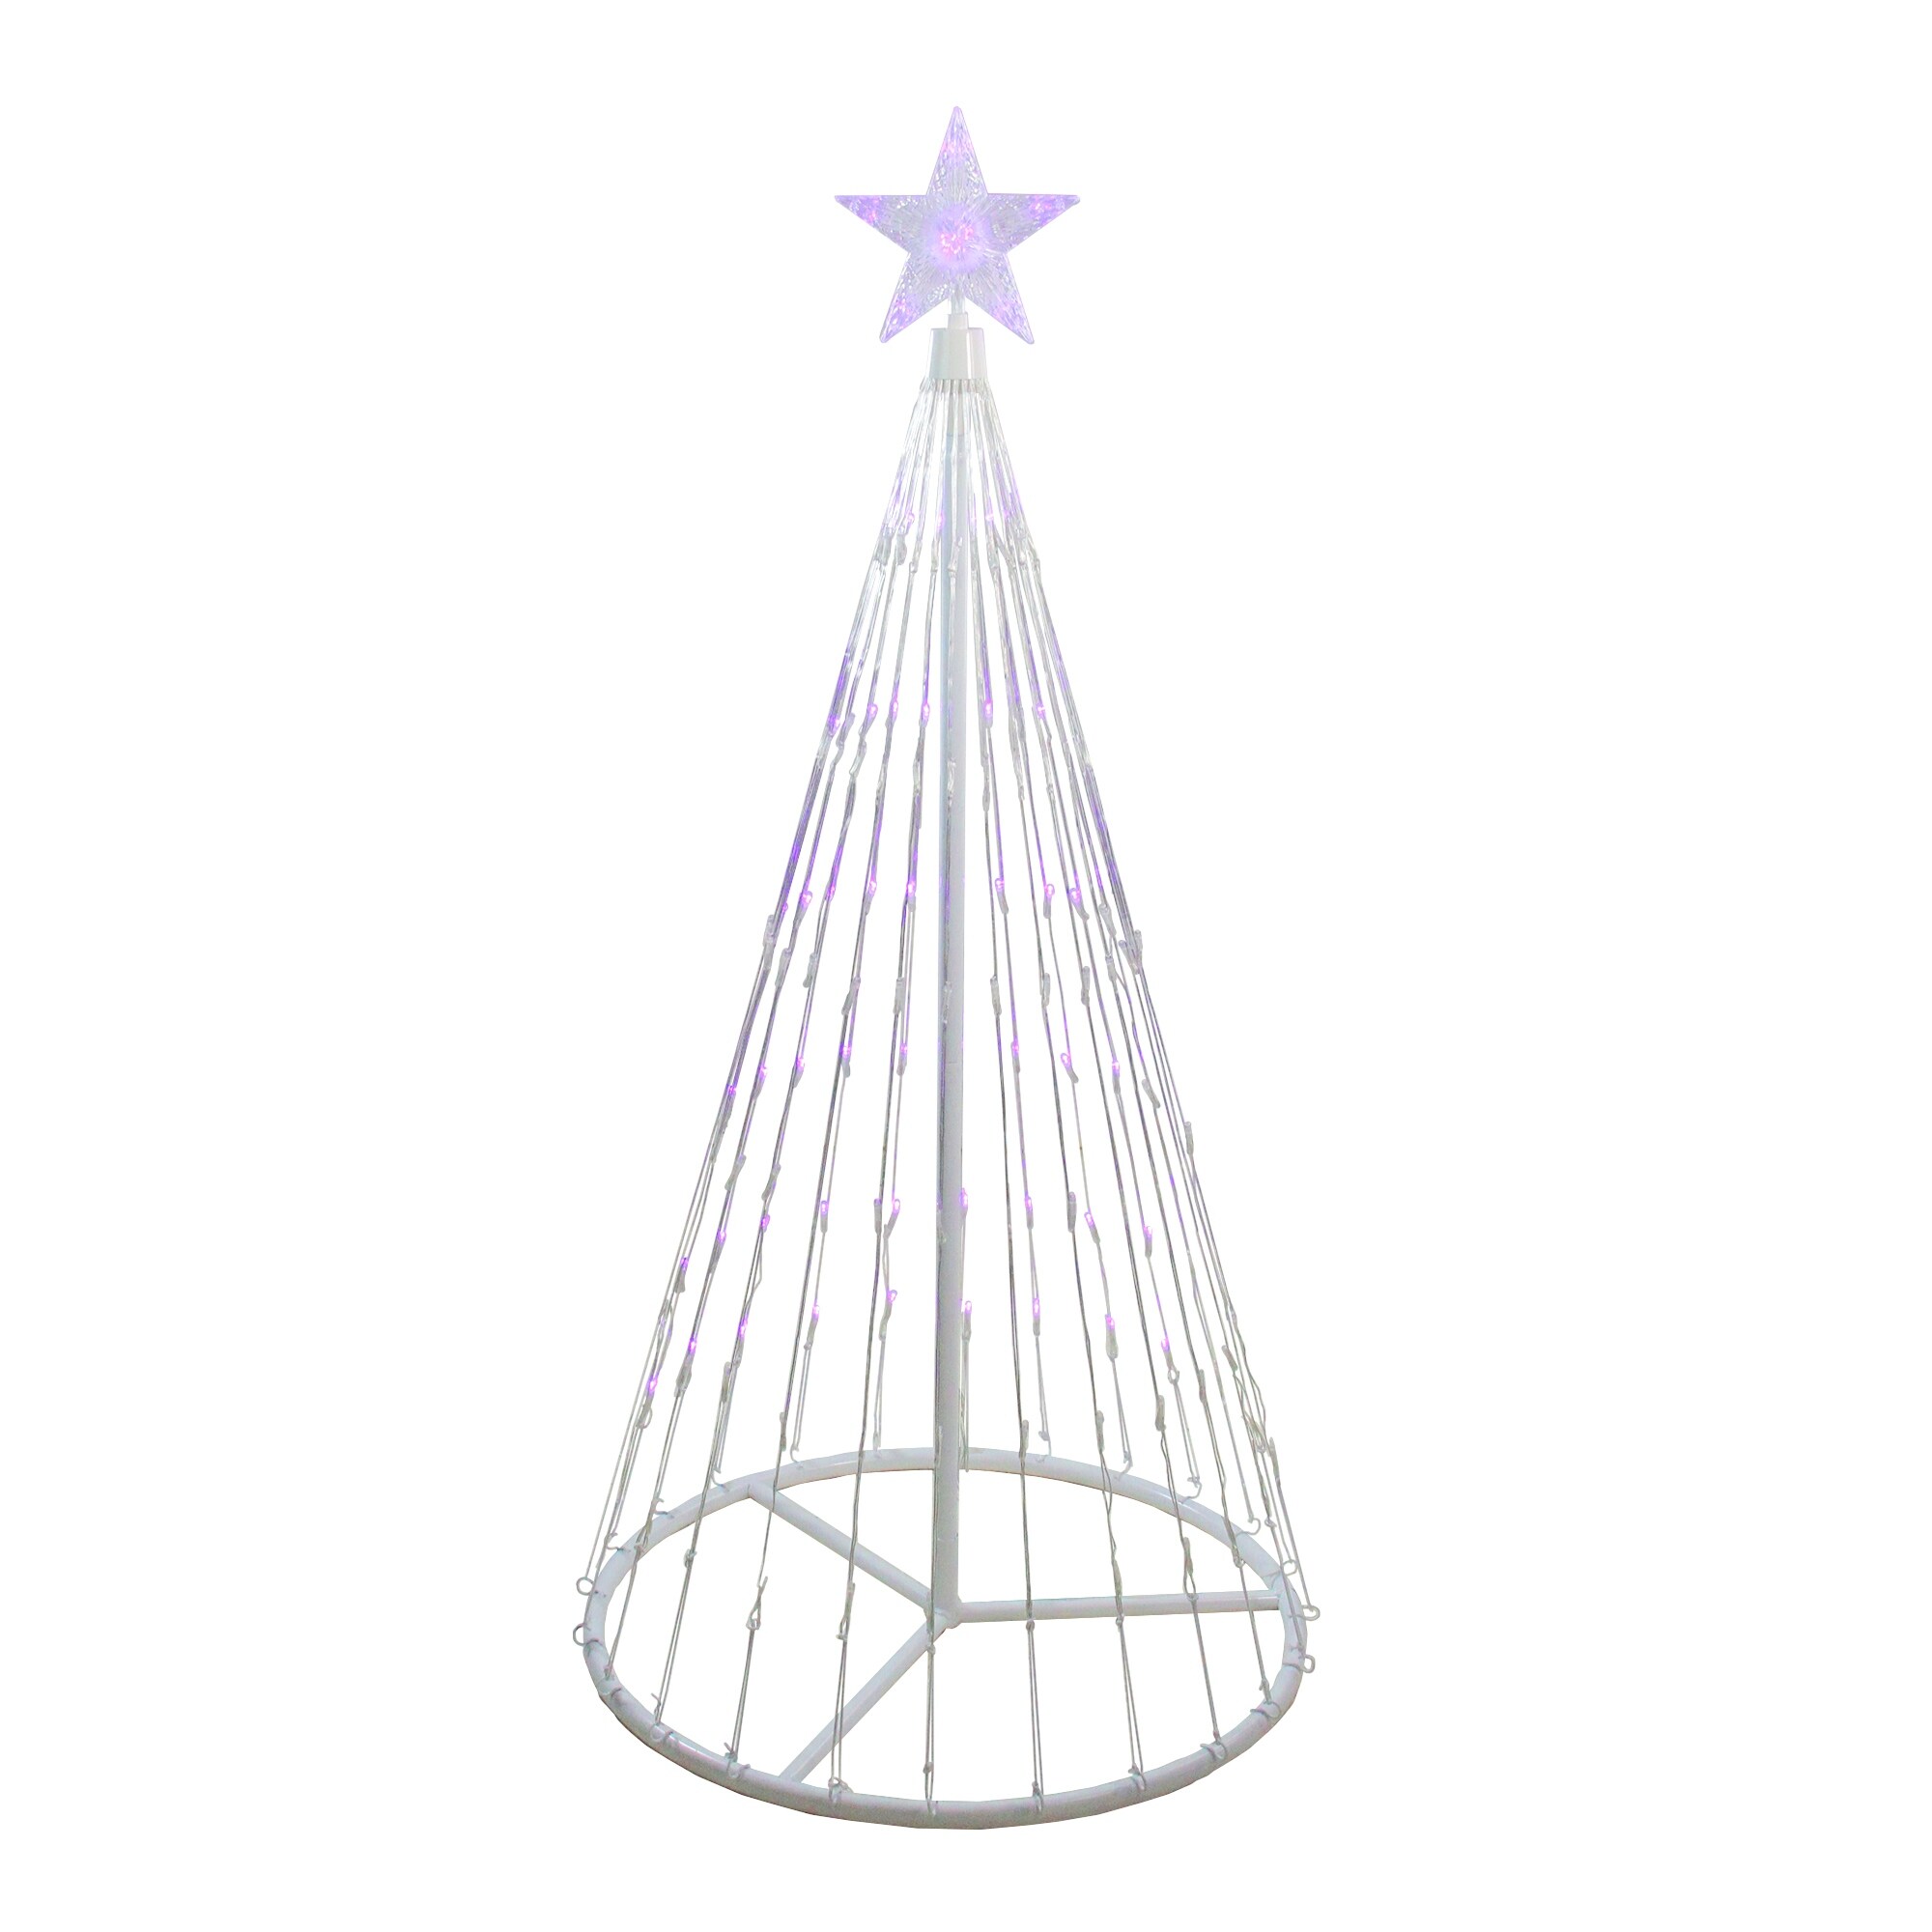 4' Purple LED Lighted Show Cone Christmas Tree Outdoor Decor